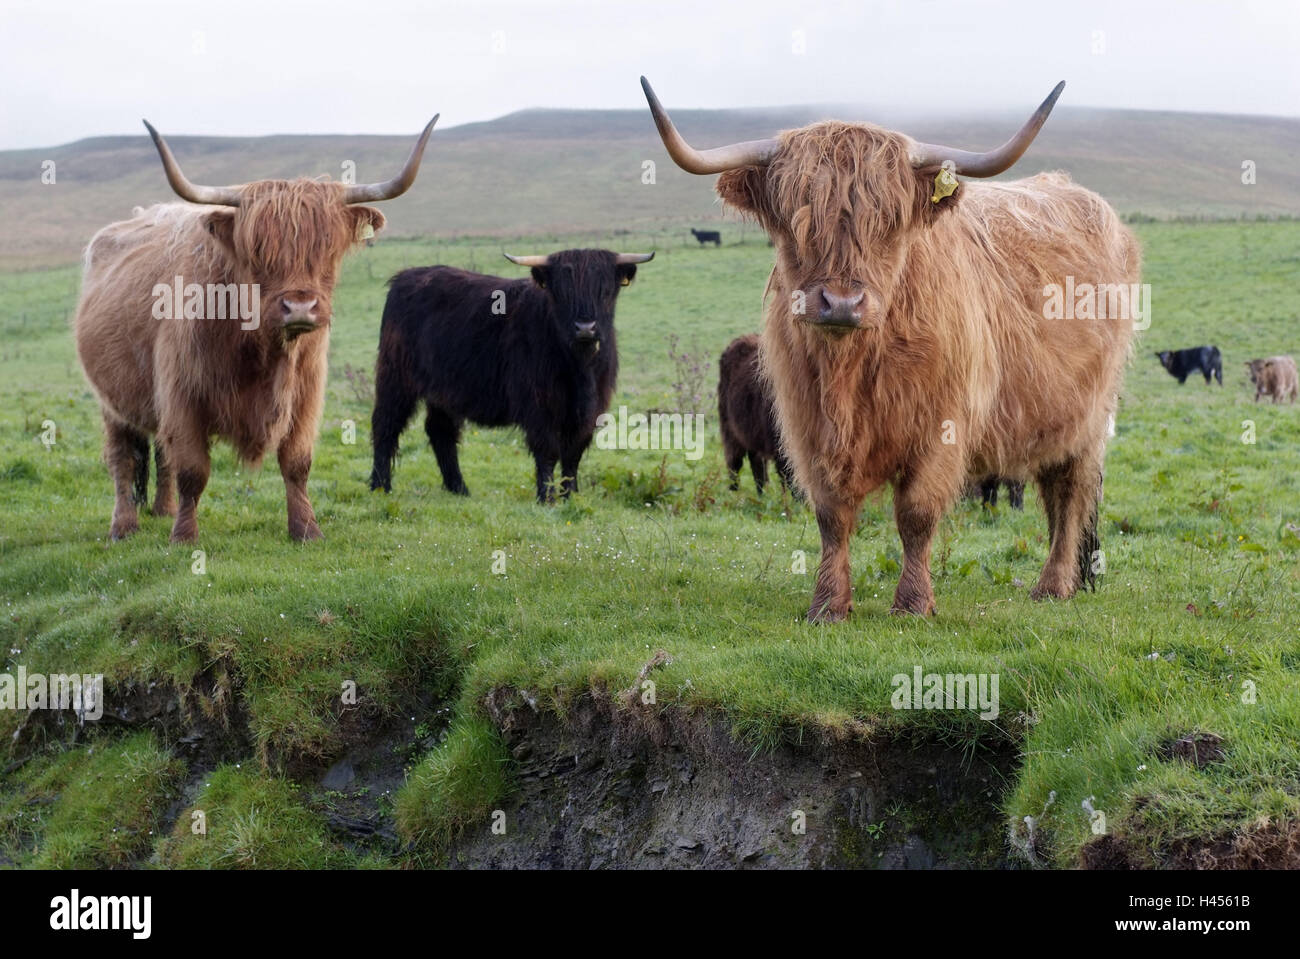 Great Britain, Scotland, Orkney Islands, island Mainland, pasture, cattle, Highland Cattle, Orkney, place of interest, nature, meadow, landscape, animals, cows, herd, benefit animals, agriculture, cattle breeding, horns, fur, shaggy, Highland cattle, Stock Photo